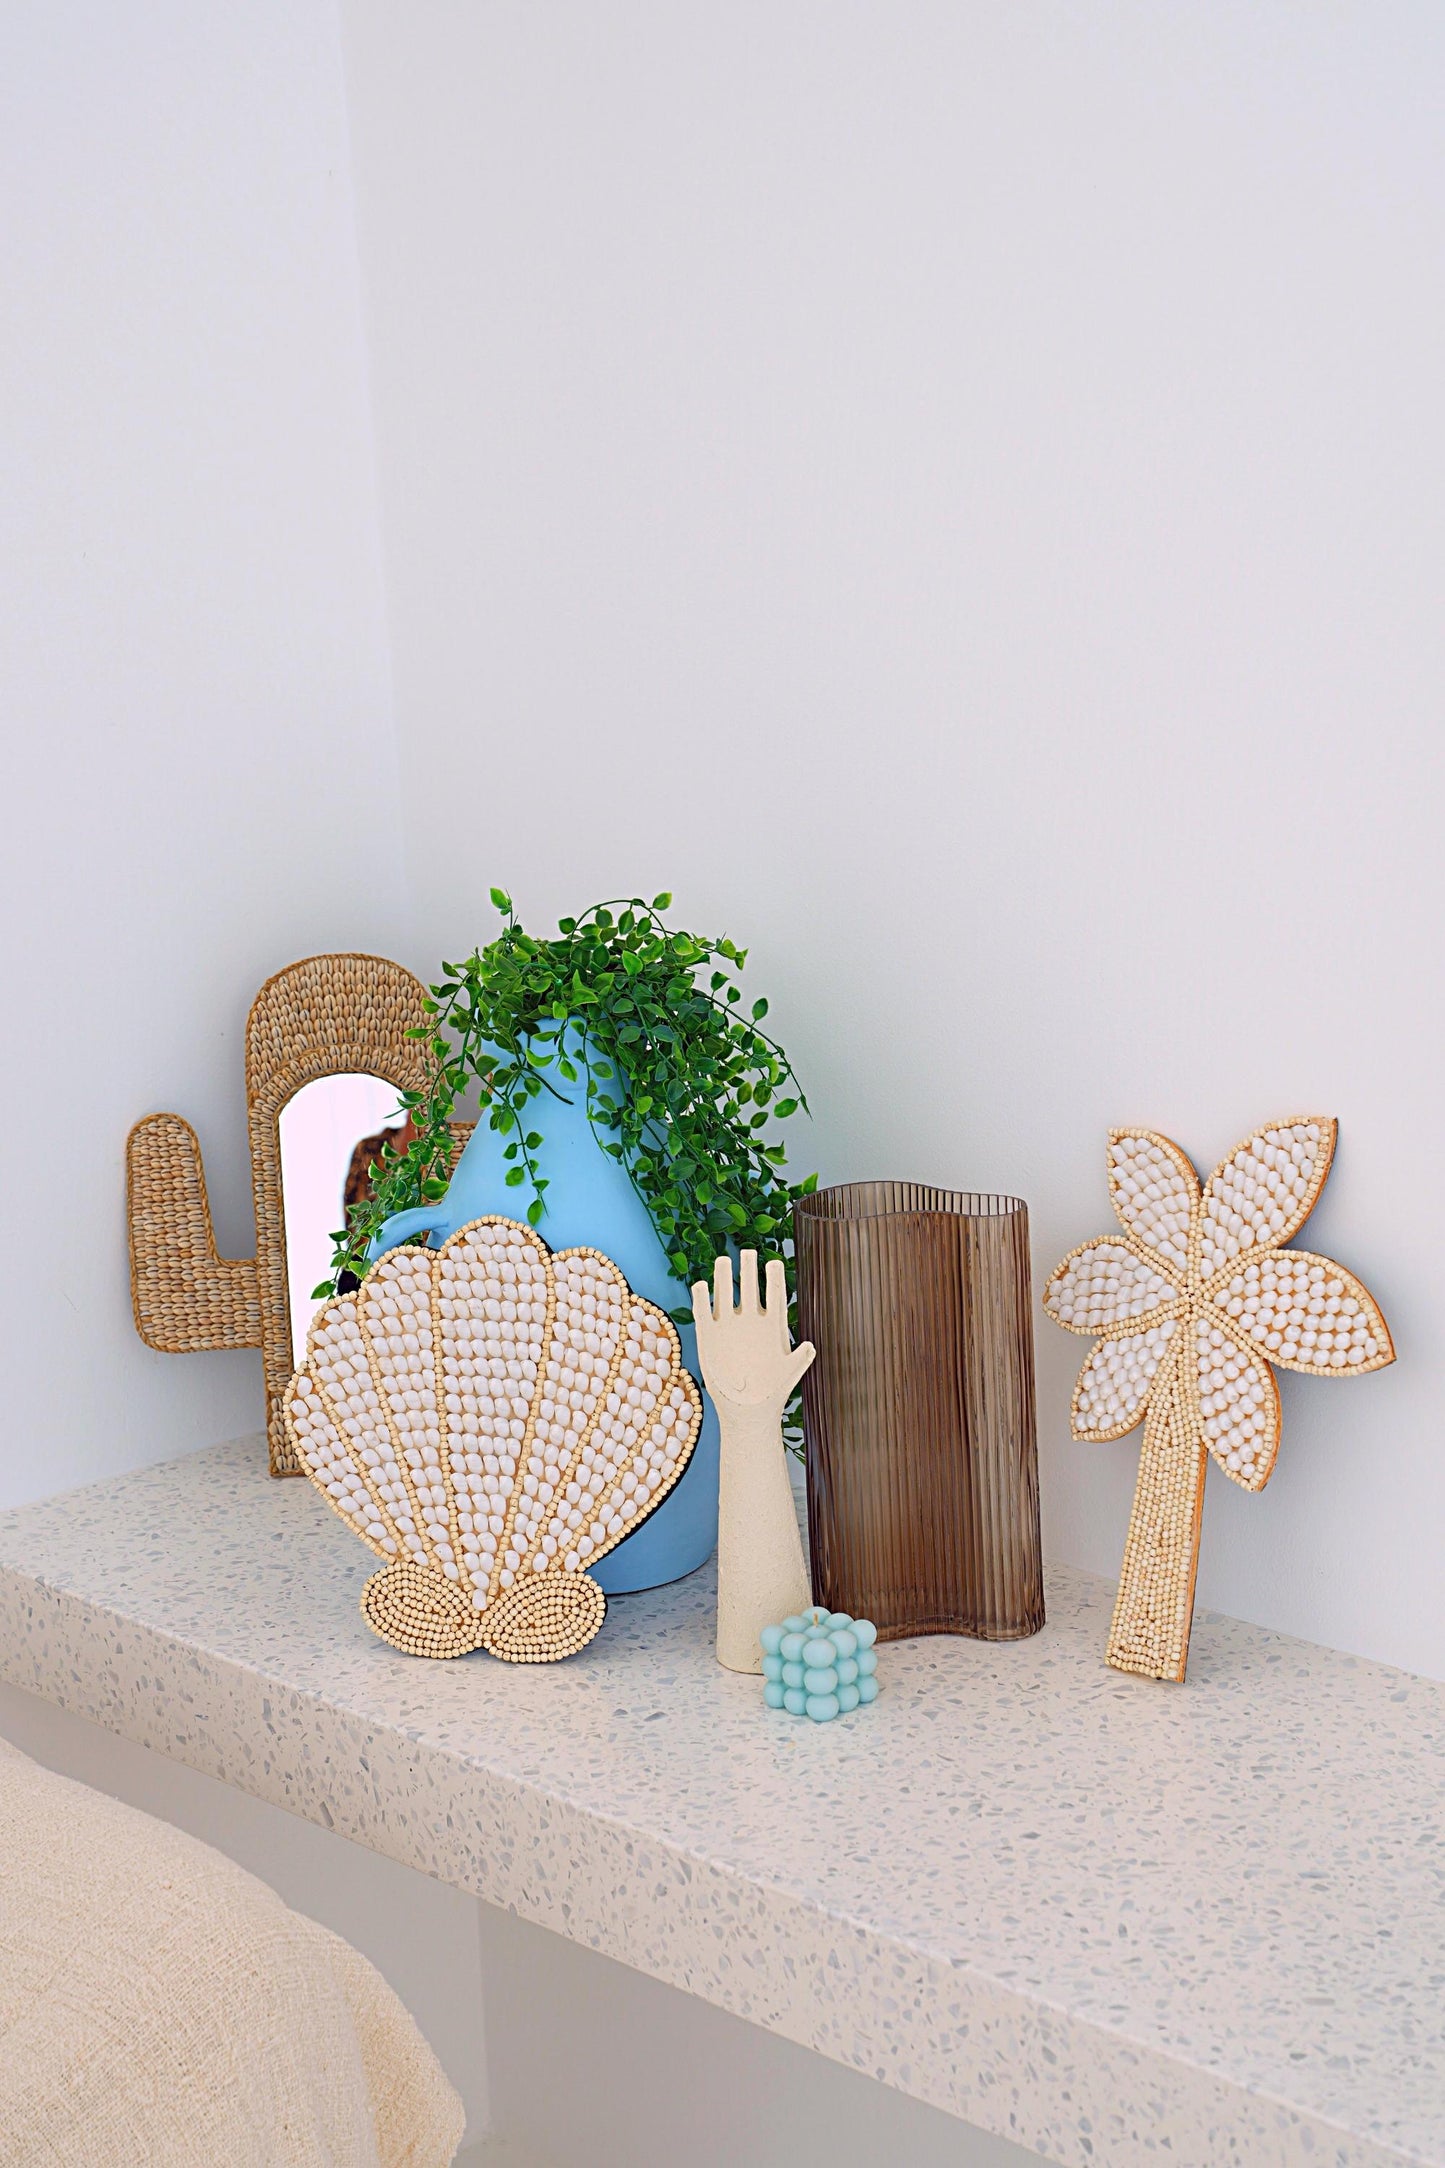 Load image into Gallery viewer, Large Sea Shells Wall Hanging Decor - Clam Shell / Palm Tree / Mermaid / Cactus
